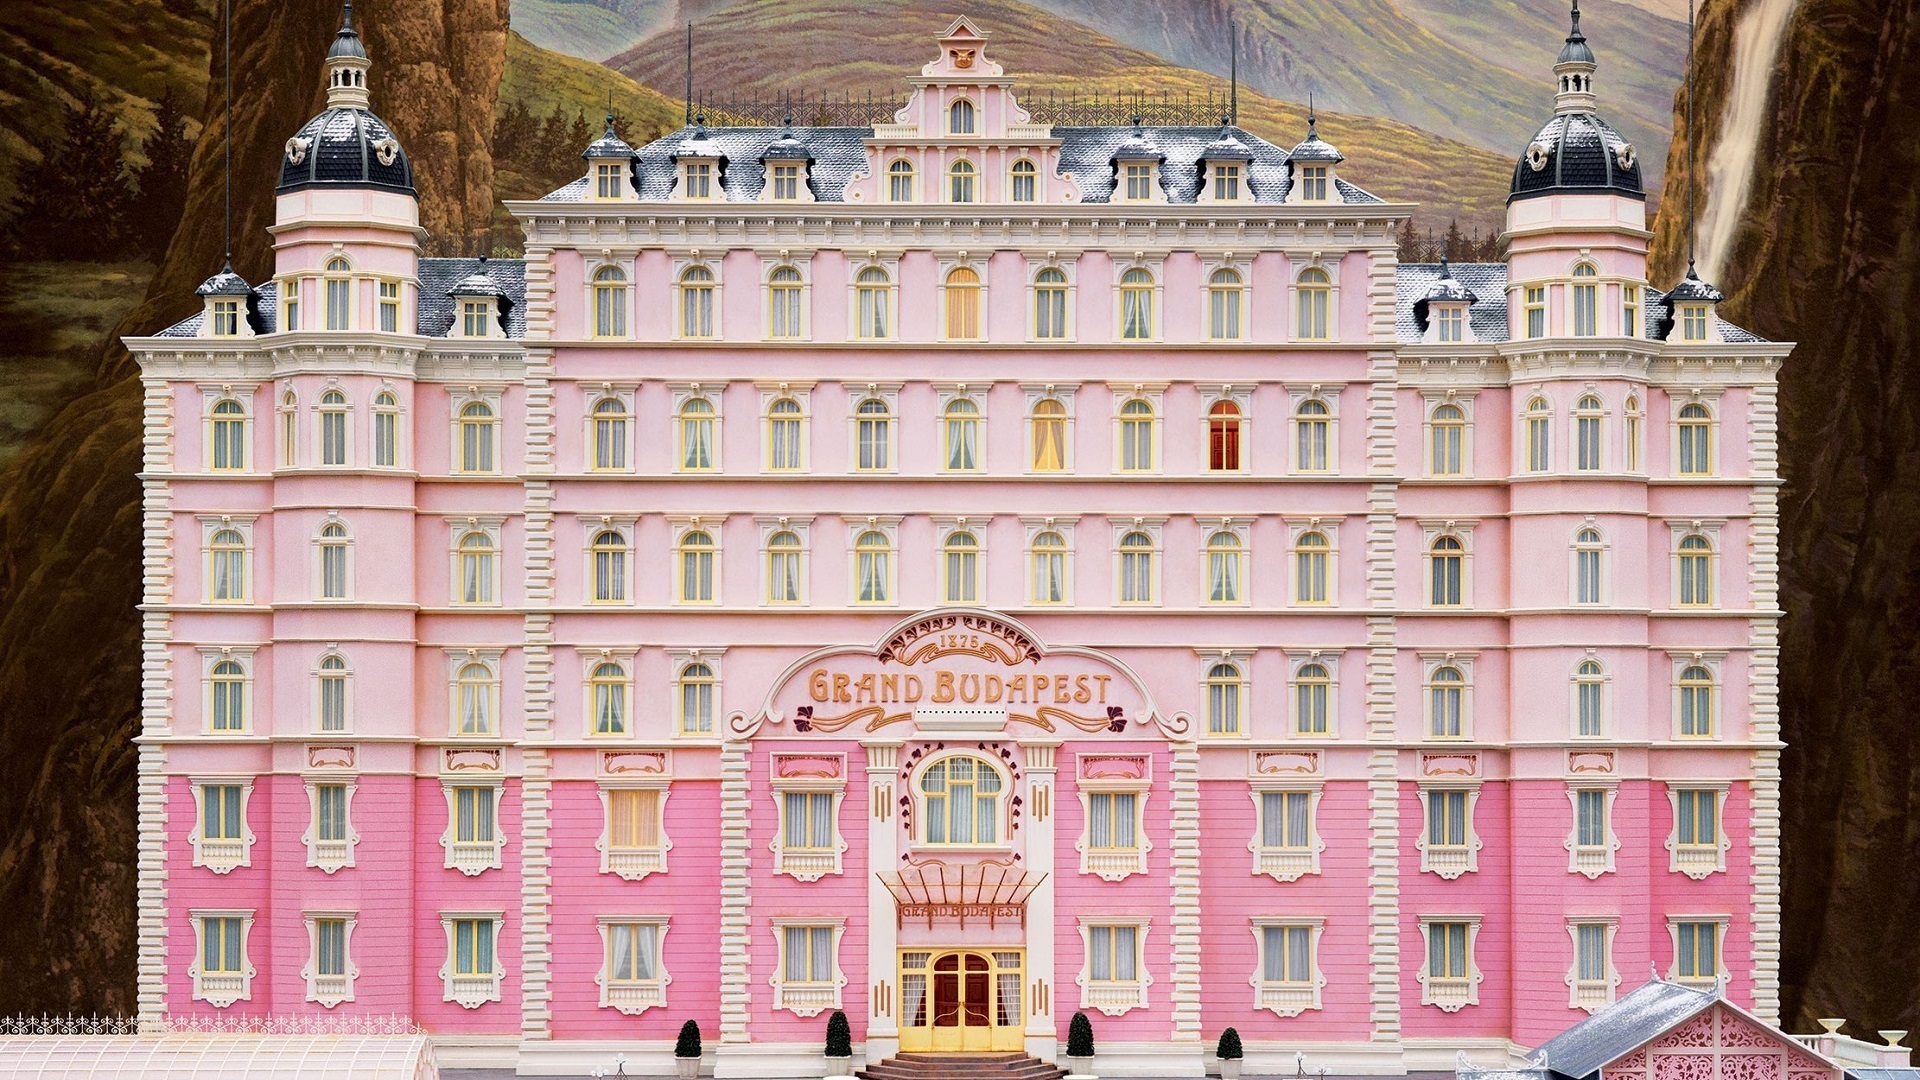 the grand budapest hotel, budapest, movie, hotel cell phone wallpapers